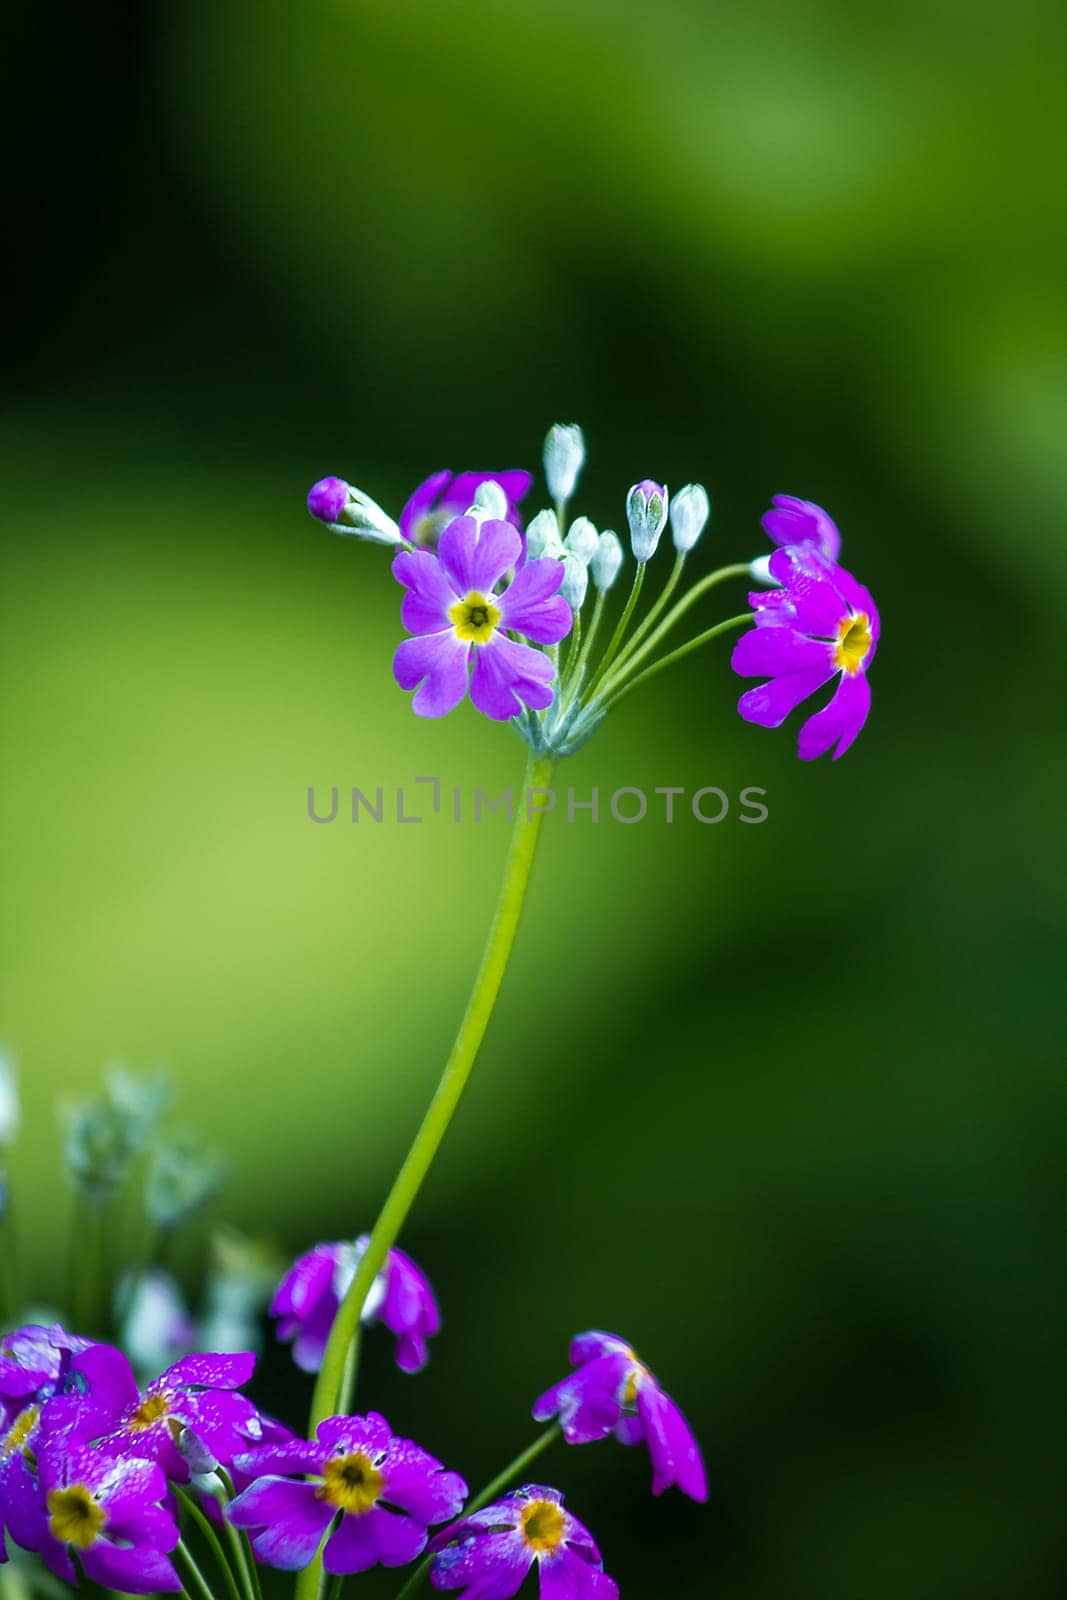 Verbena blooms in a bouquet of heart-shaped petals, by Puripatt